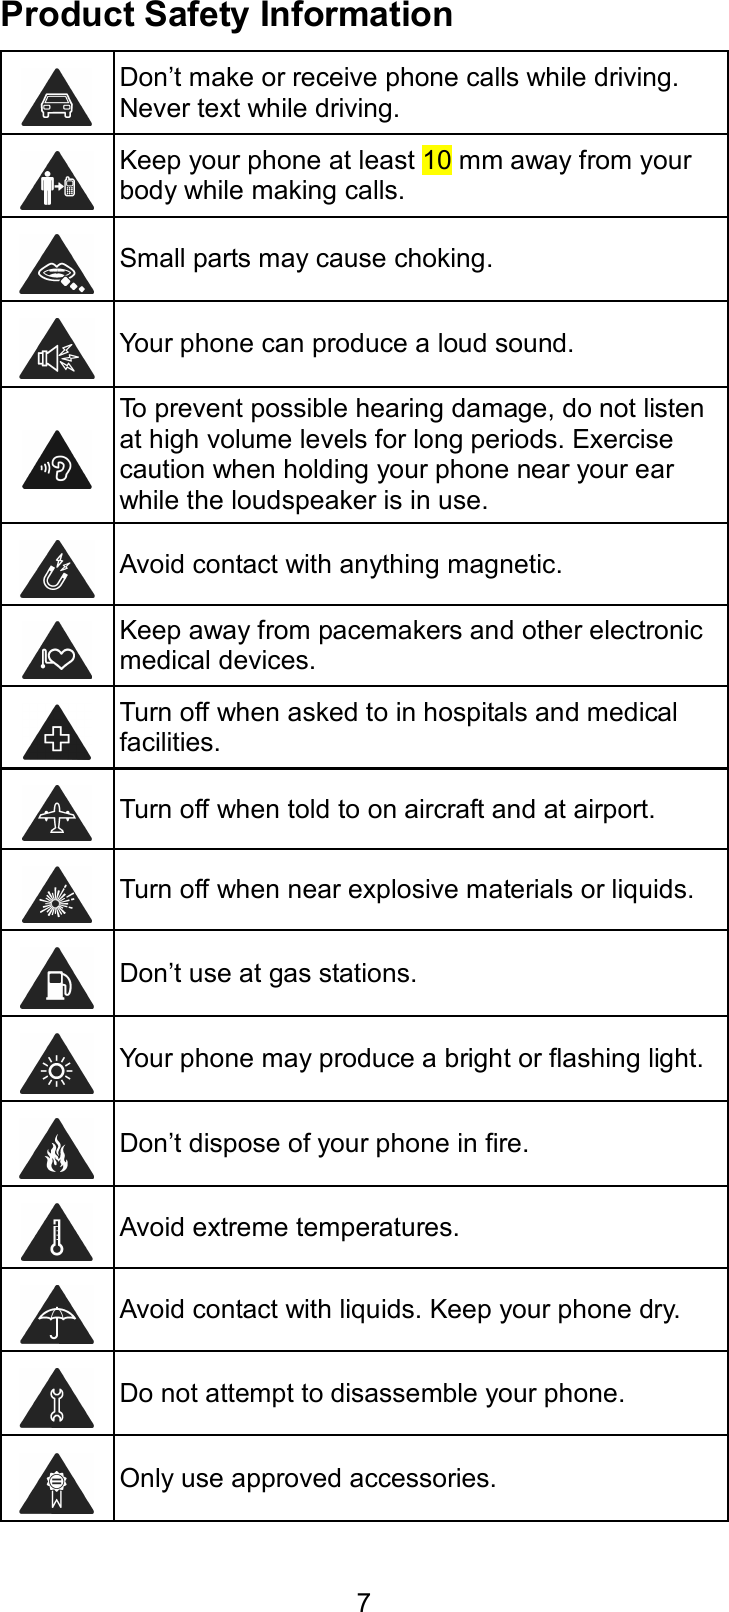  7 Product Safety Information  Don’t make or receive phone calls while driving. Never text while driving.  Keep your phone at least 10 mm away from your body while making calls.  Small parts may cause choking.  Your phone can produce a loud sound.  To prevent possible hearing damage, do not listen at high volume levels for long periods. Exercise caution when holding your phone near your ear while the loudspeaker is in use.  Avoid contact with anything magnetic.  Keep away from pacemakers and other electronic medical devices.  Turn off when asked to in hospitals and medical facilities.  Turn off when told to on aircraft and at airport.  Turn off when near explosive materials or liquids.  Don’t use at gas stations.  Your phone may produce a bright or flashing light.  Don’t dispose of your phone in fire.  Avoid extreme temperatures.  Avoid contact with liquids. Keep your phone dry.  Do not attempt to disassemble your phone.  Only use approved accessories. 